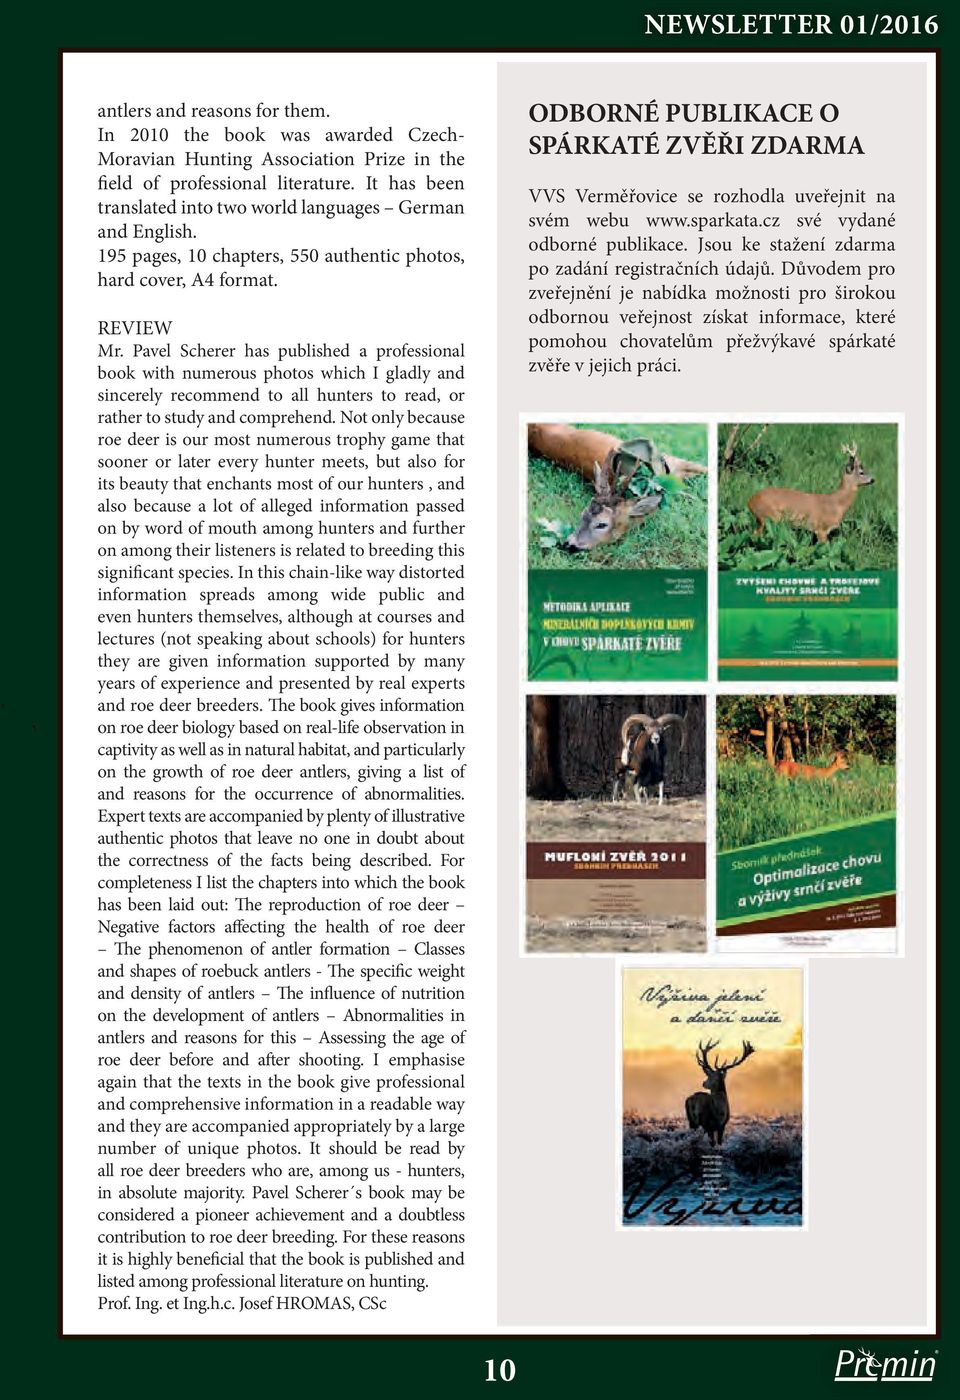 Pavel Scherer has published a professional book with numerous photos which I gladly and sincerely recommend to all hunters to read, or rather to study and comprehend.